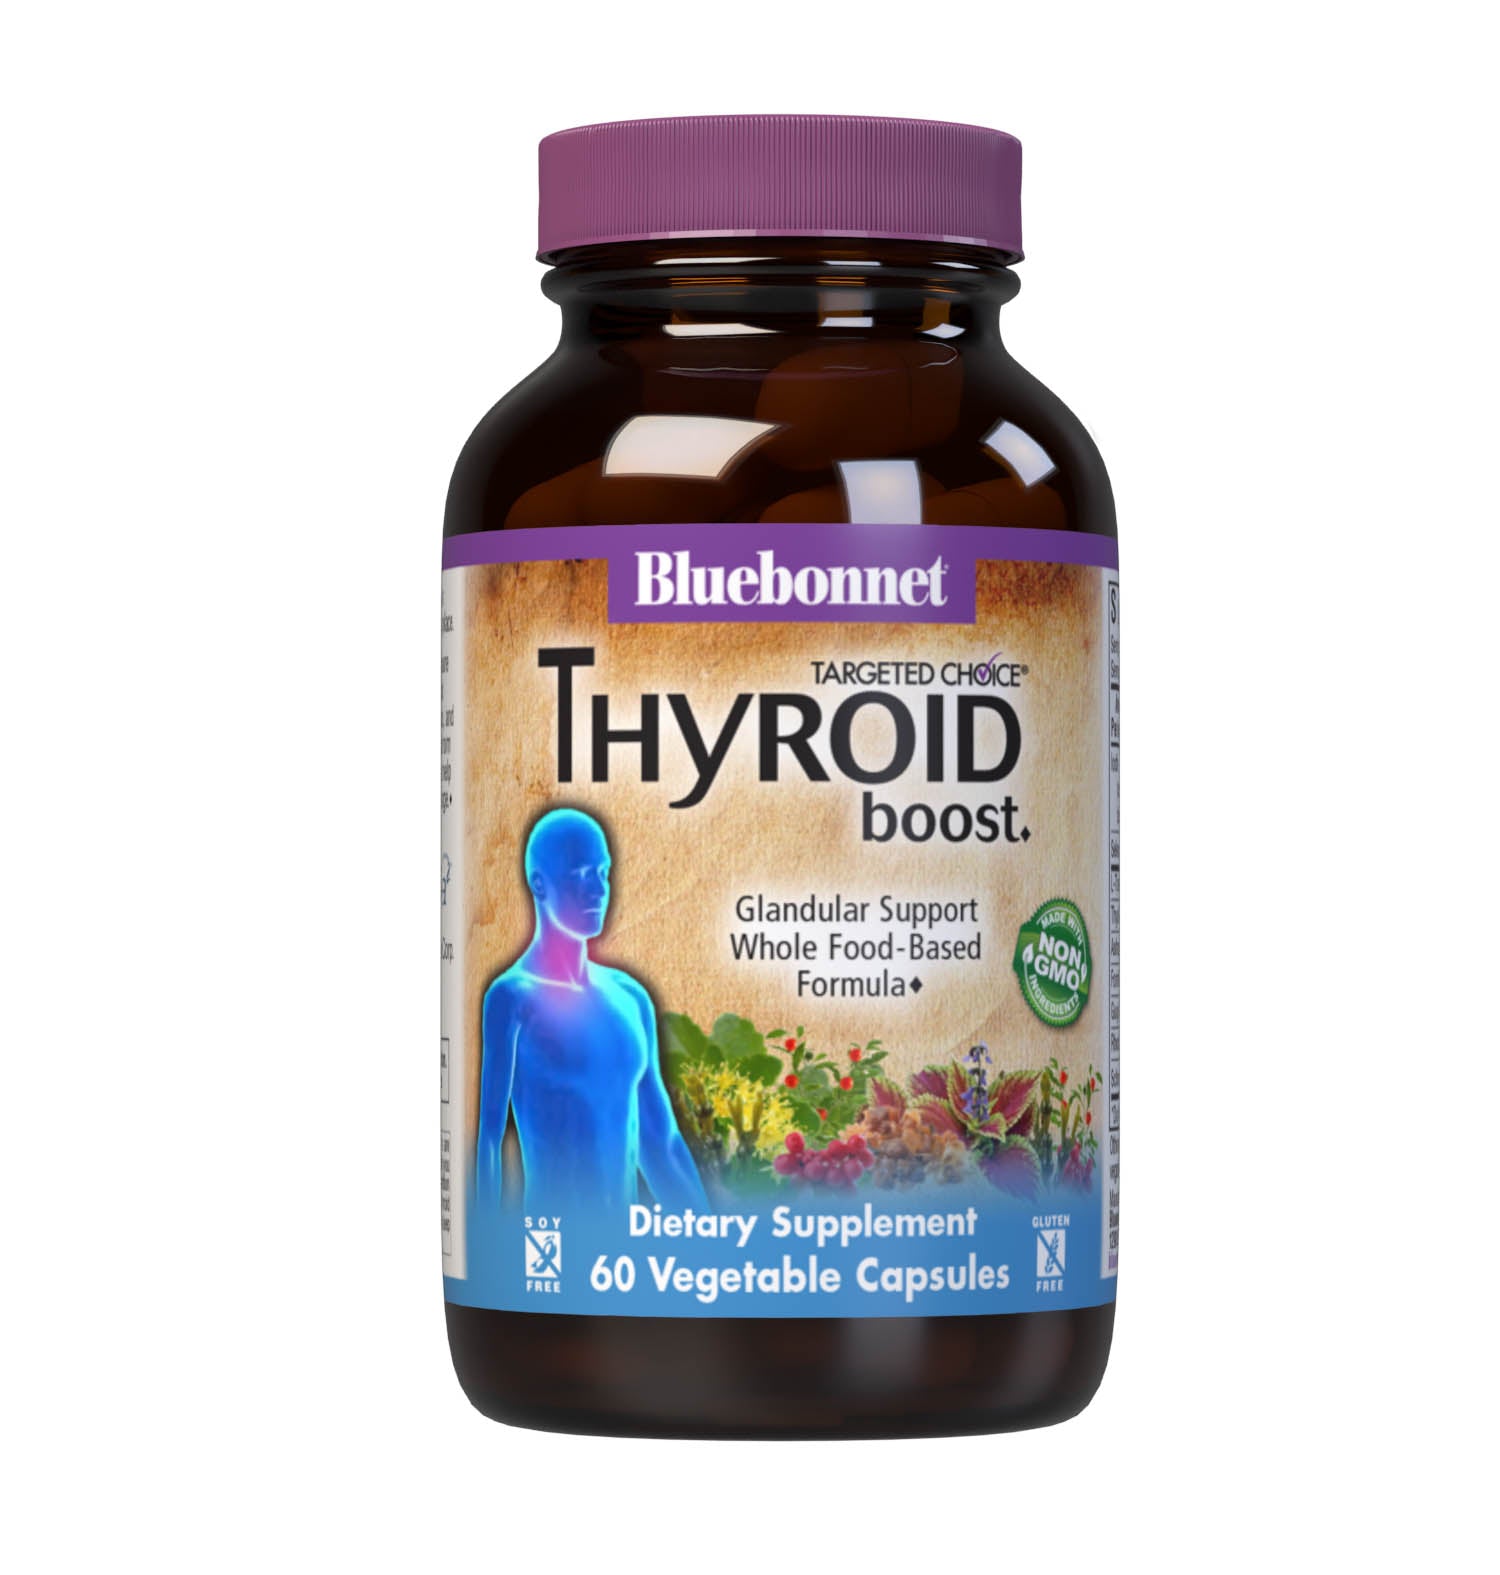 Bluebonnet’s Targeted Choice Thyroid Boost 60 Vegetable Capsules are specially formulated with unique, sustainably harvested or wildcrafted botanical extracts, free-form L-tyrosine, as well as iodine from a proprietary blend of glandular powder, potassium iodide and brown seaweeds to help maintain healthy thyroid hormone levels that are within the normal range.  #size_60 count